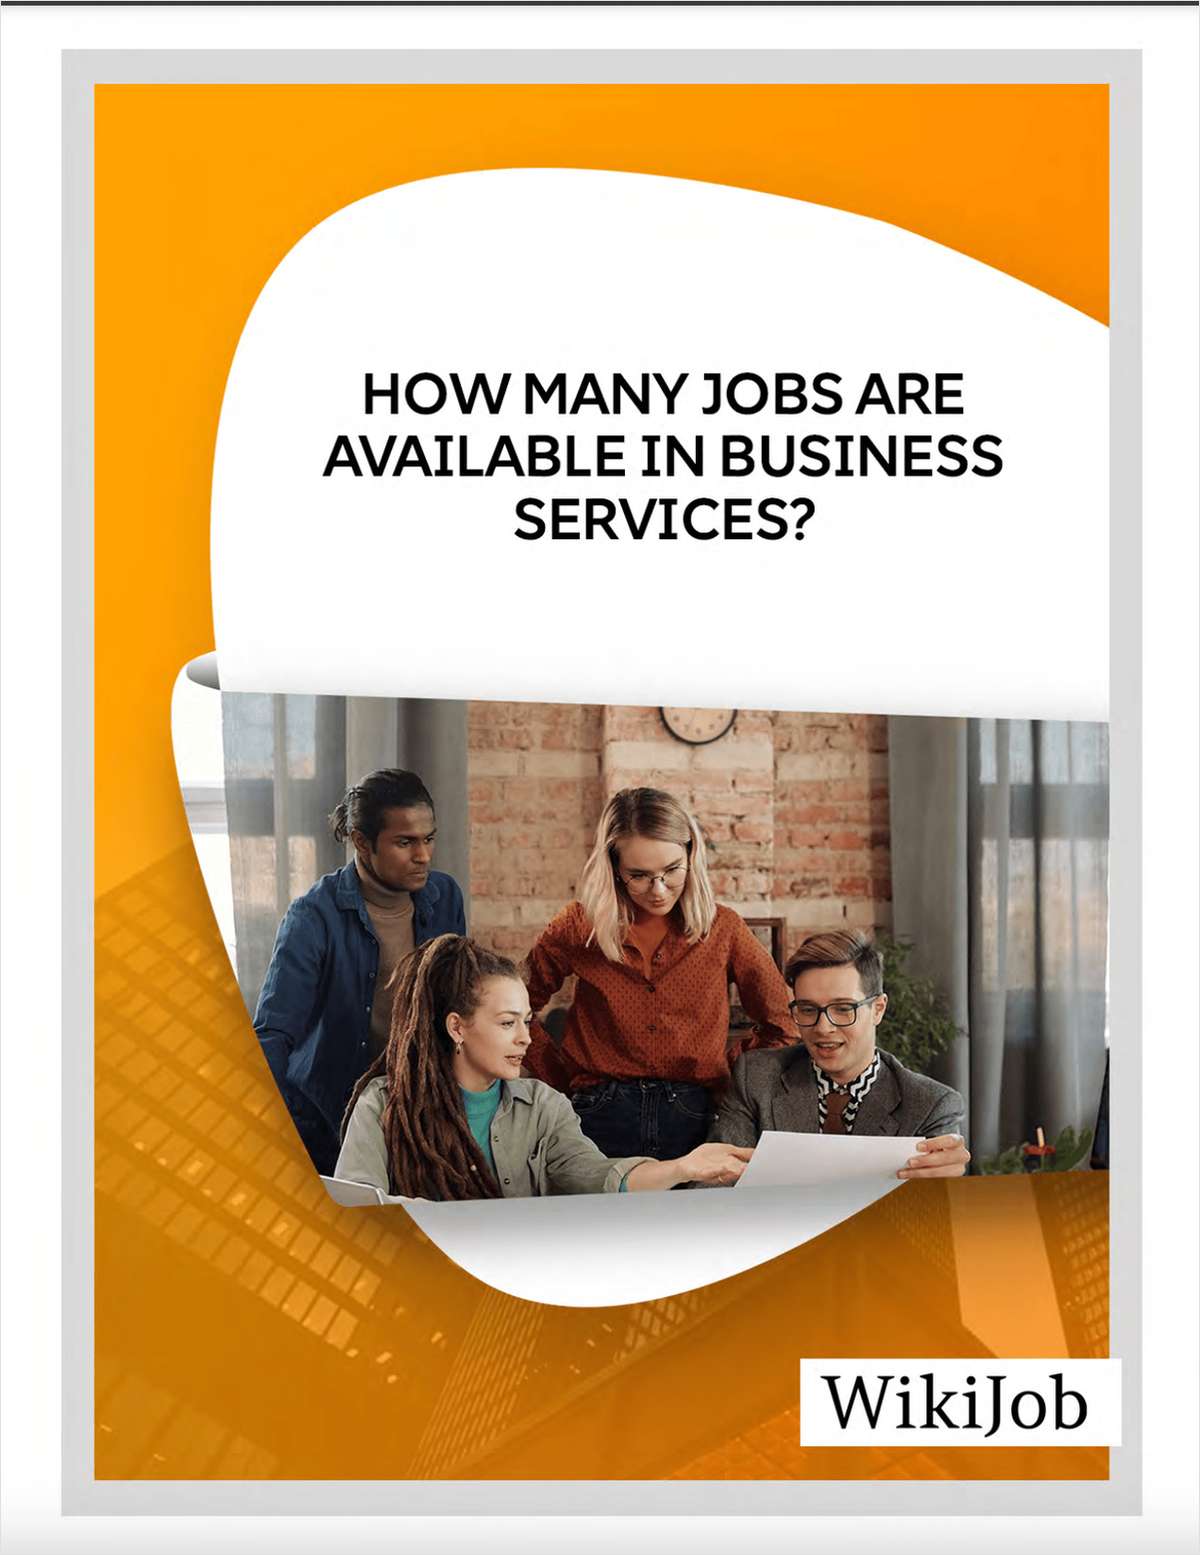 How Many Jobs Are Available in Business Services?